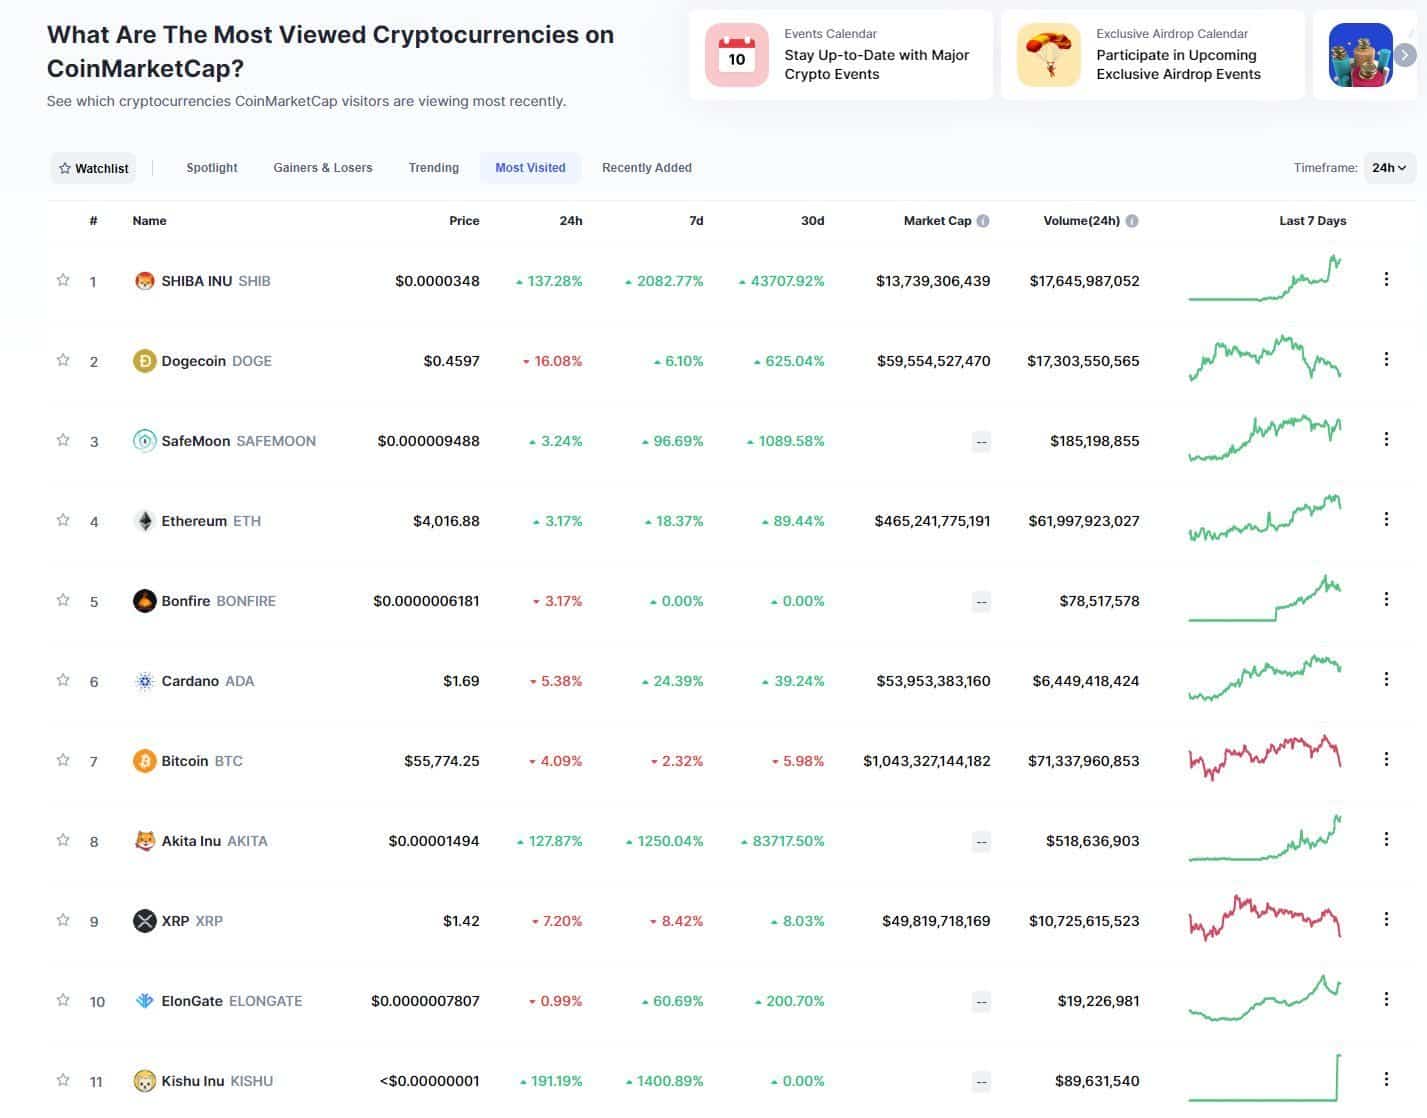 The Most Viewed Cryptocurrencies on CMC. Source: CoinMarketCap